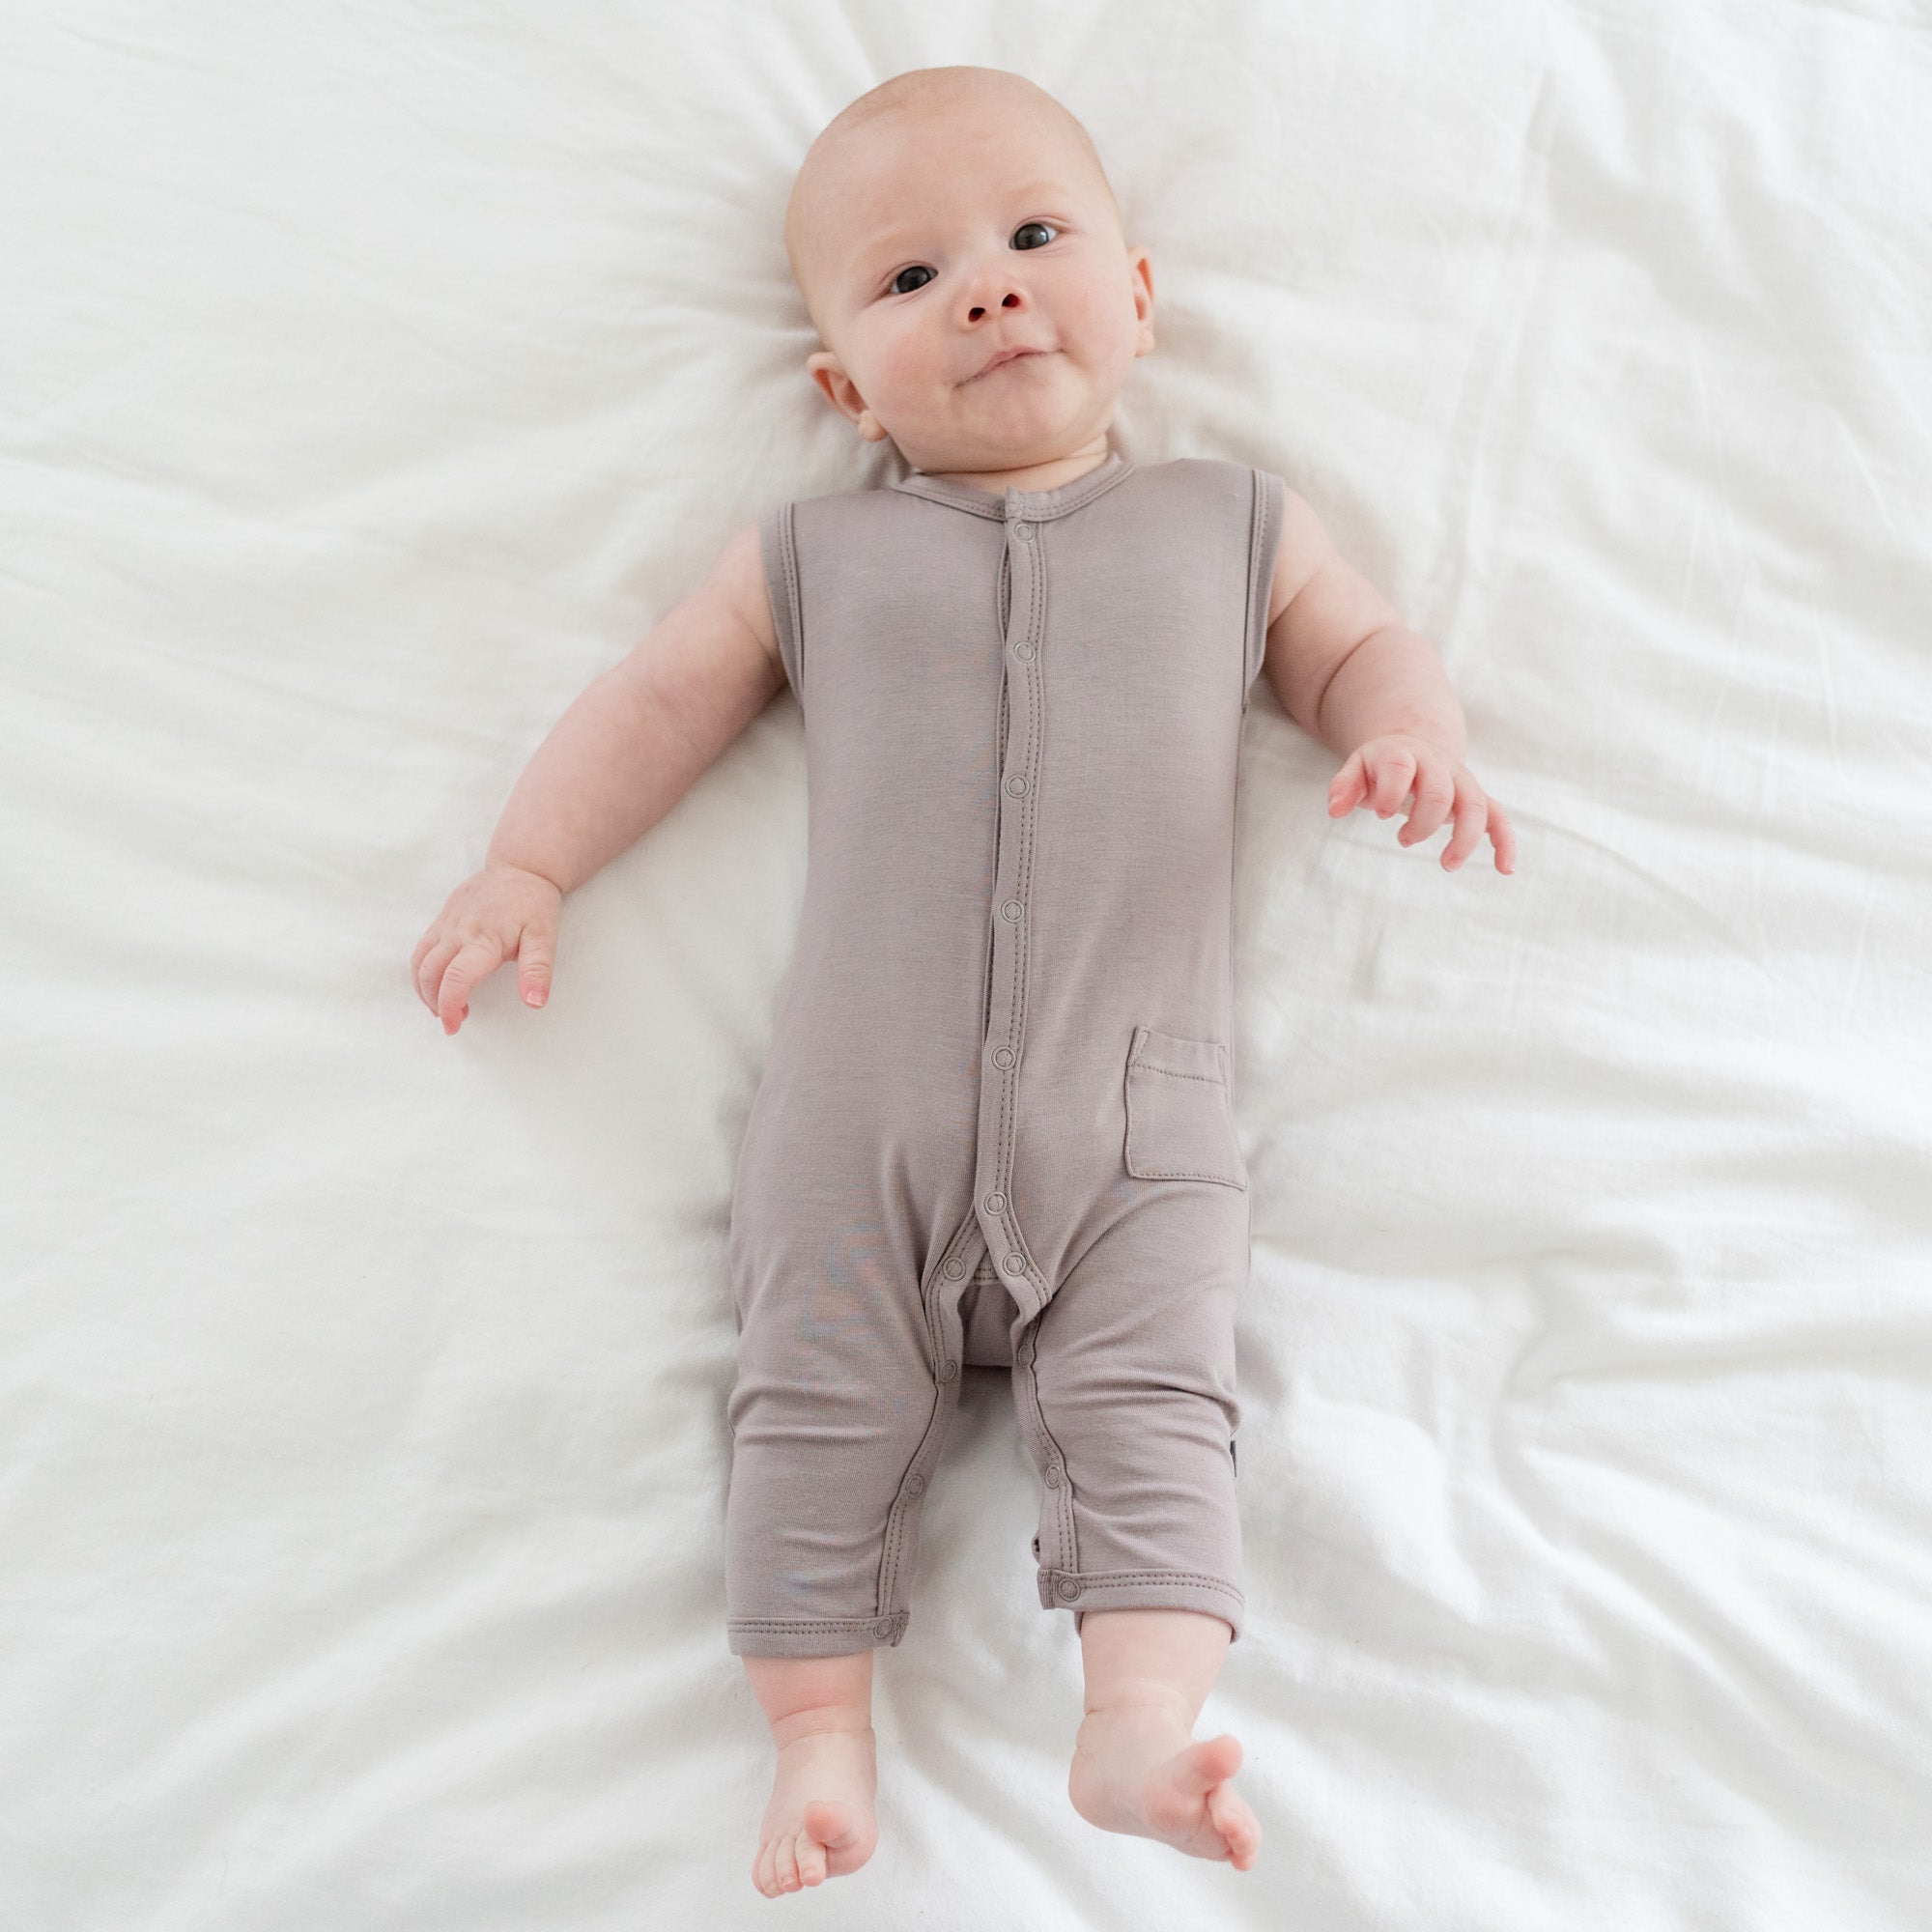 5 Month Old Baby Sleep Schedule: What Does That Look Like?